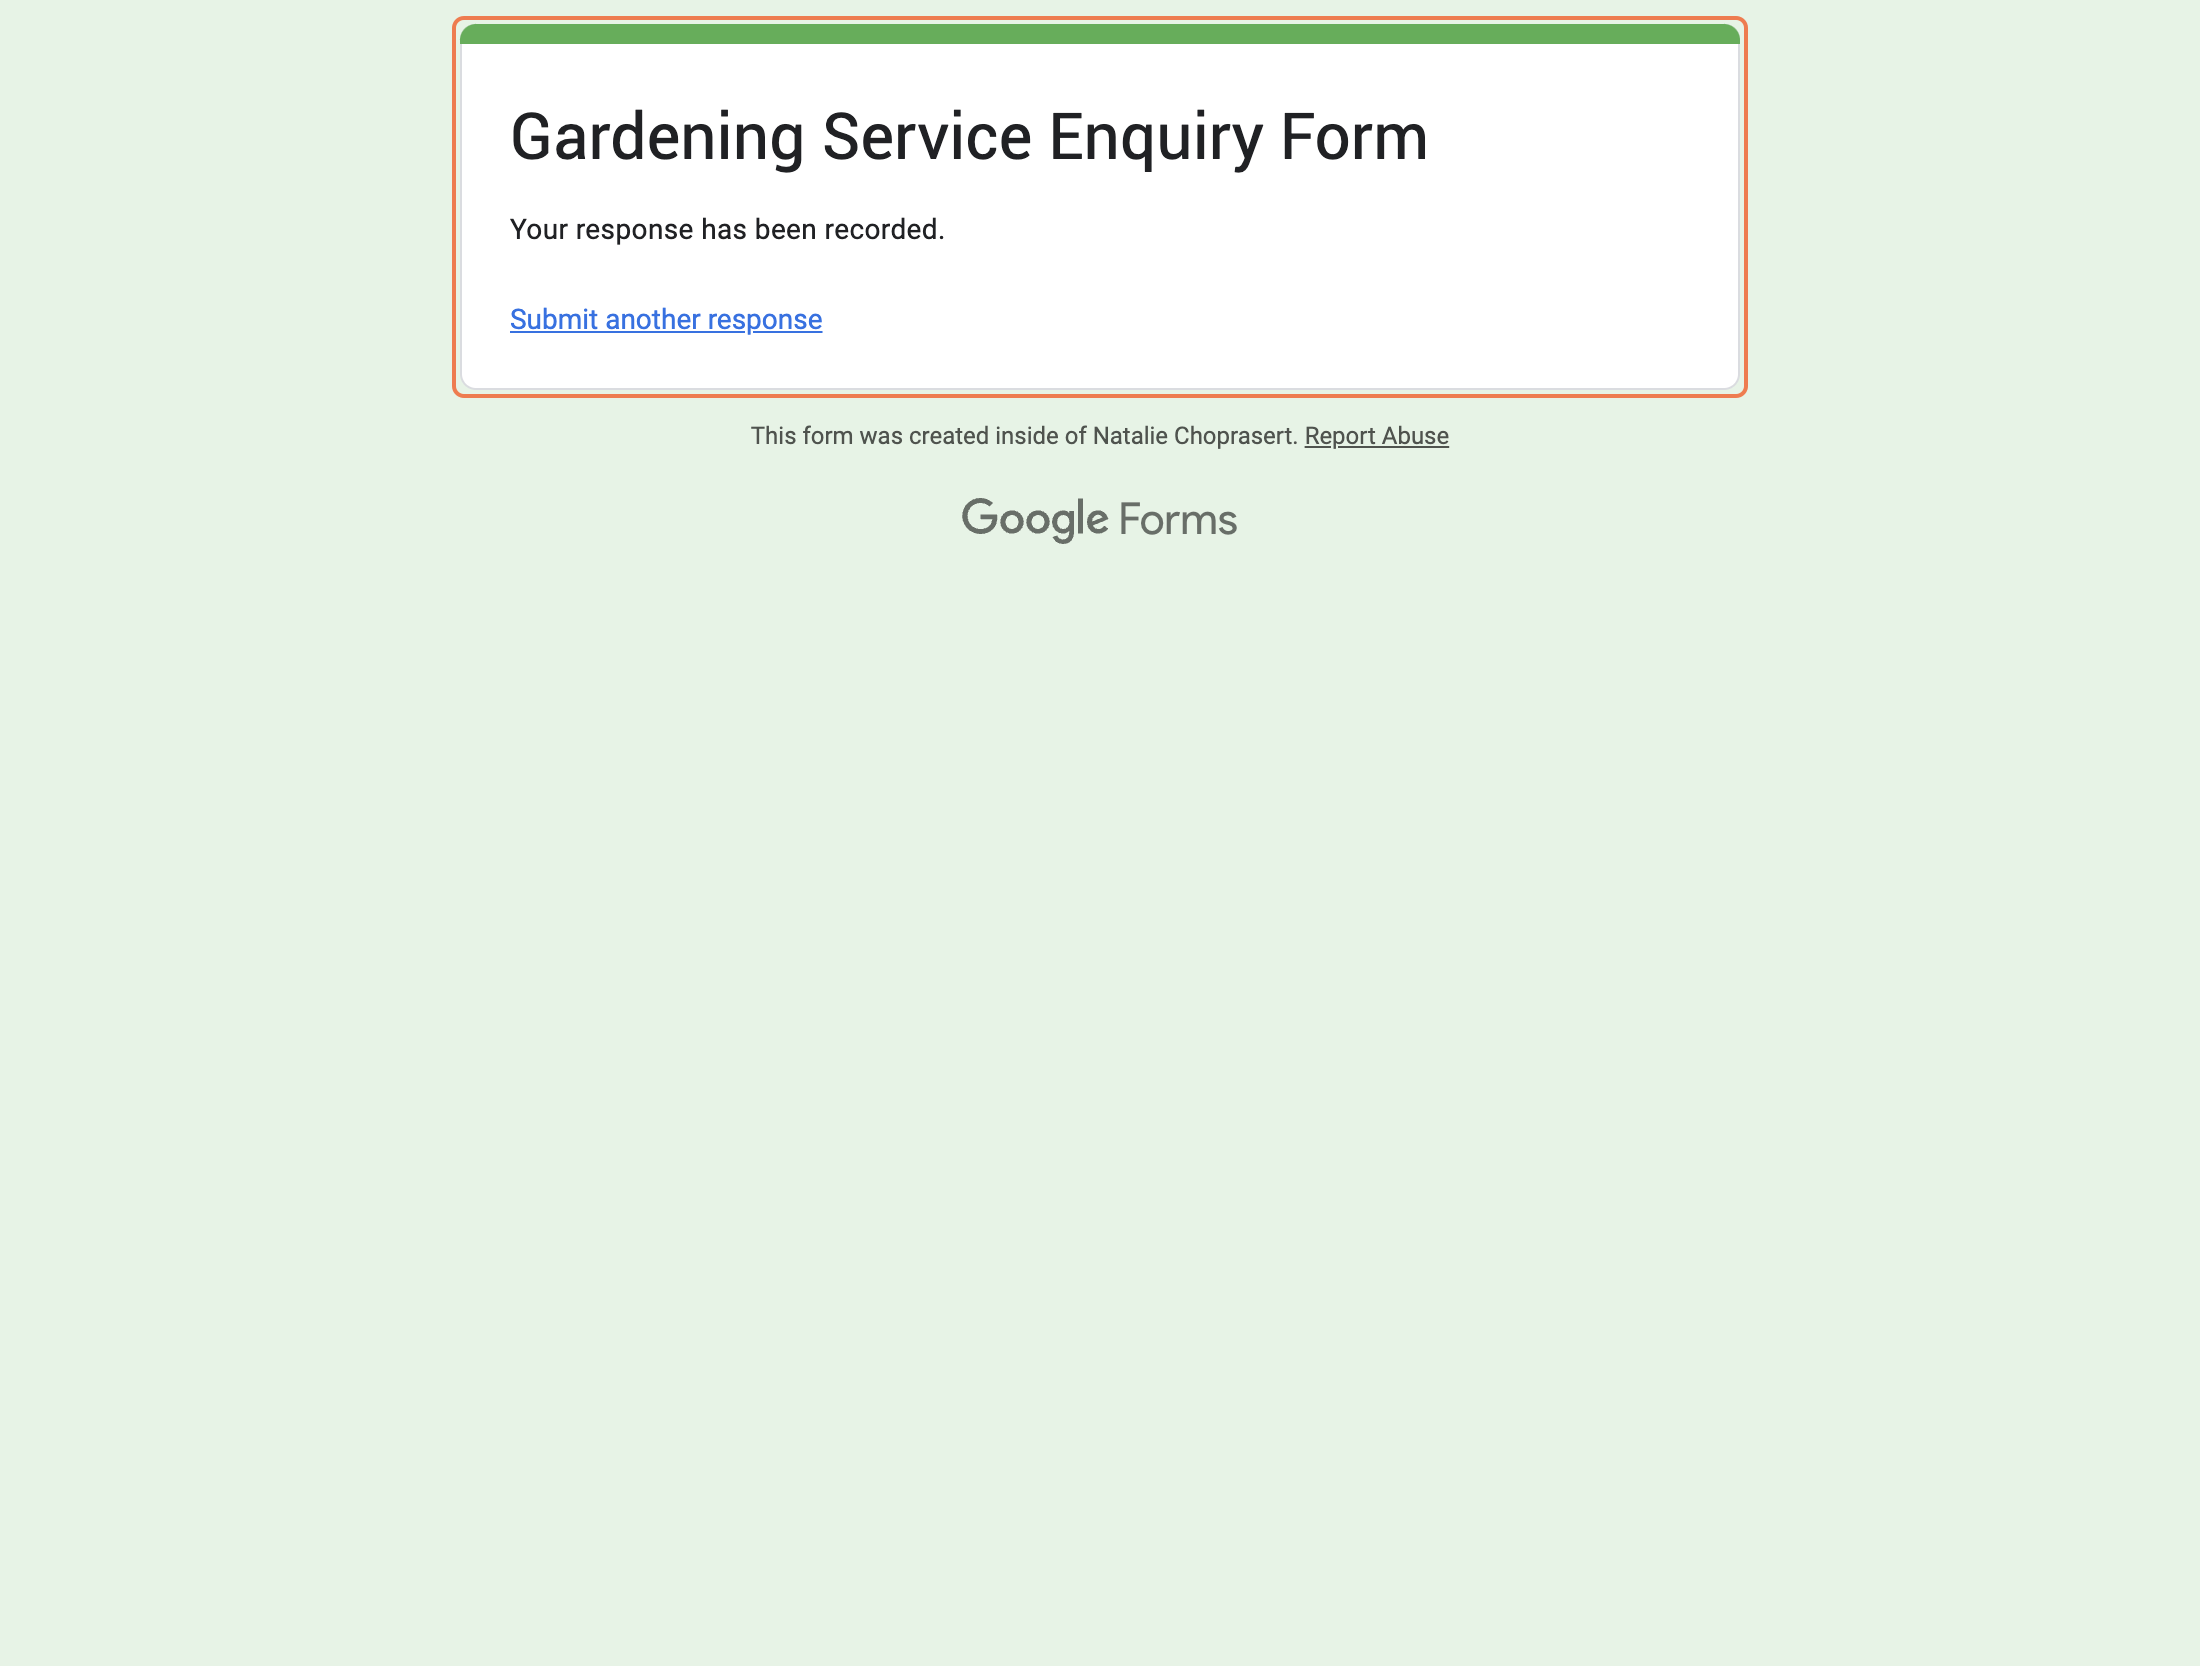 Click on Gardening Service Enquiry Form…